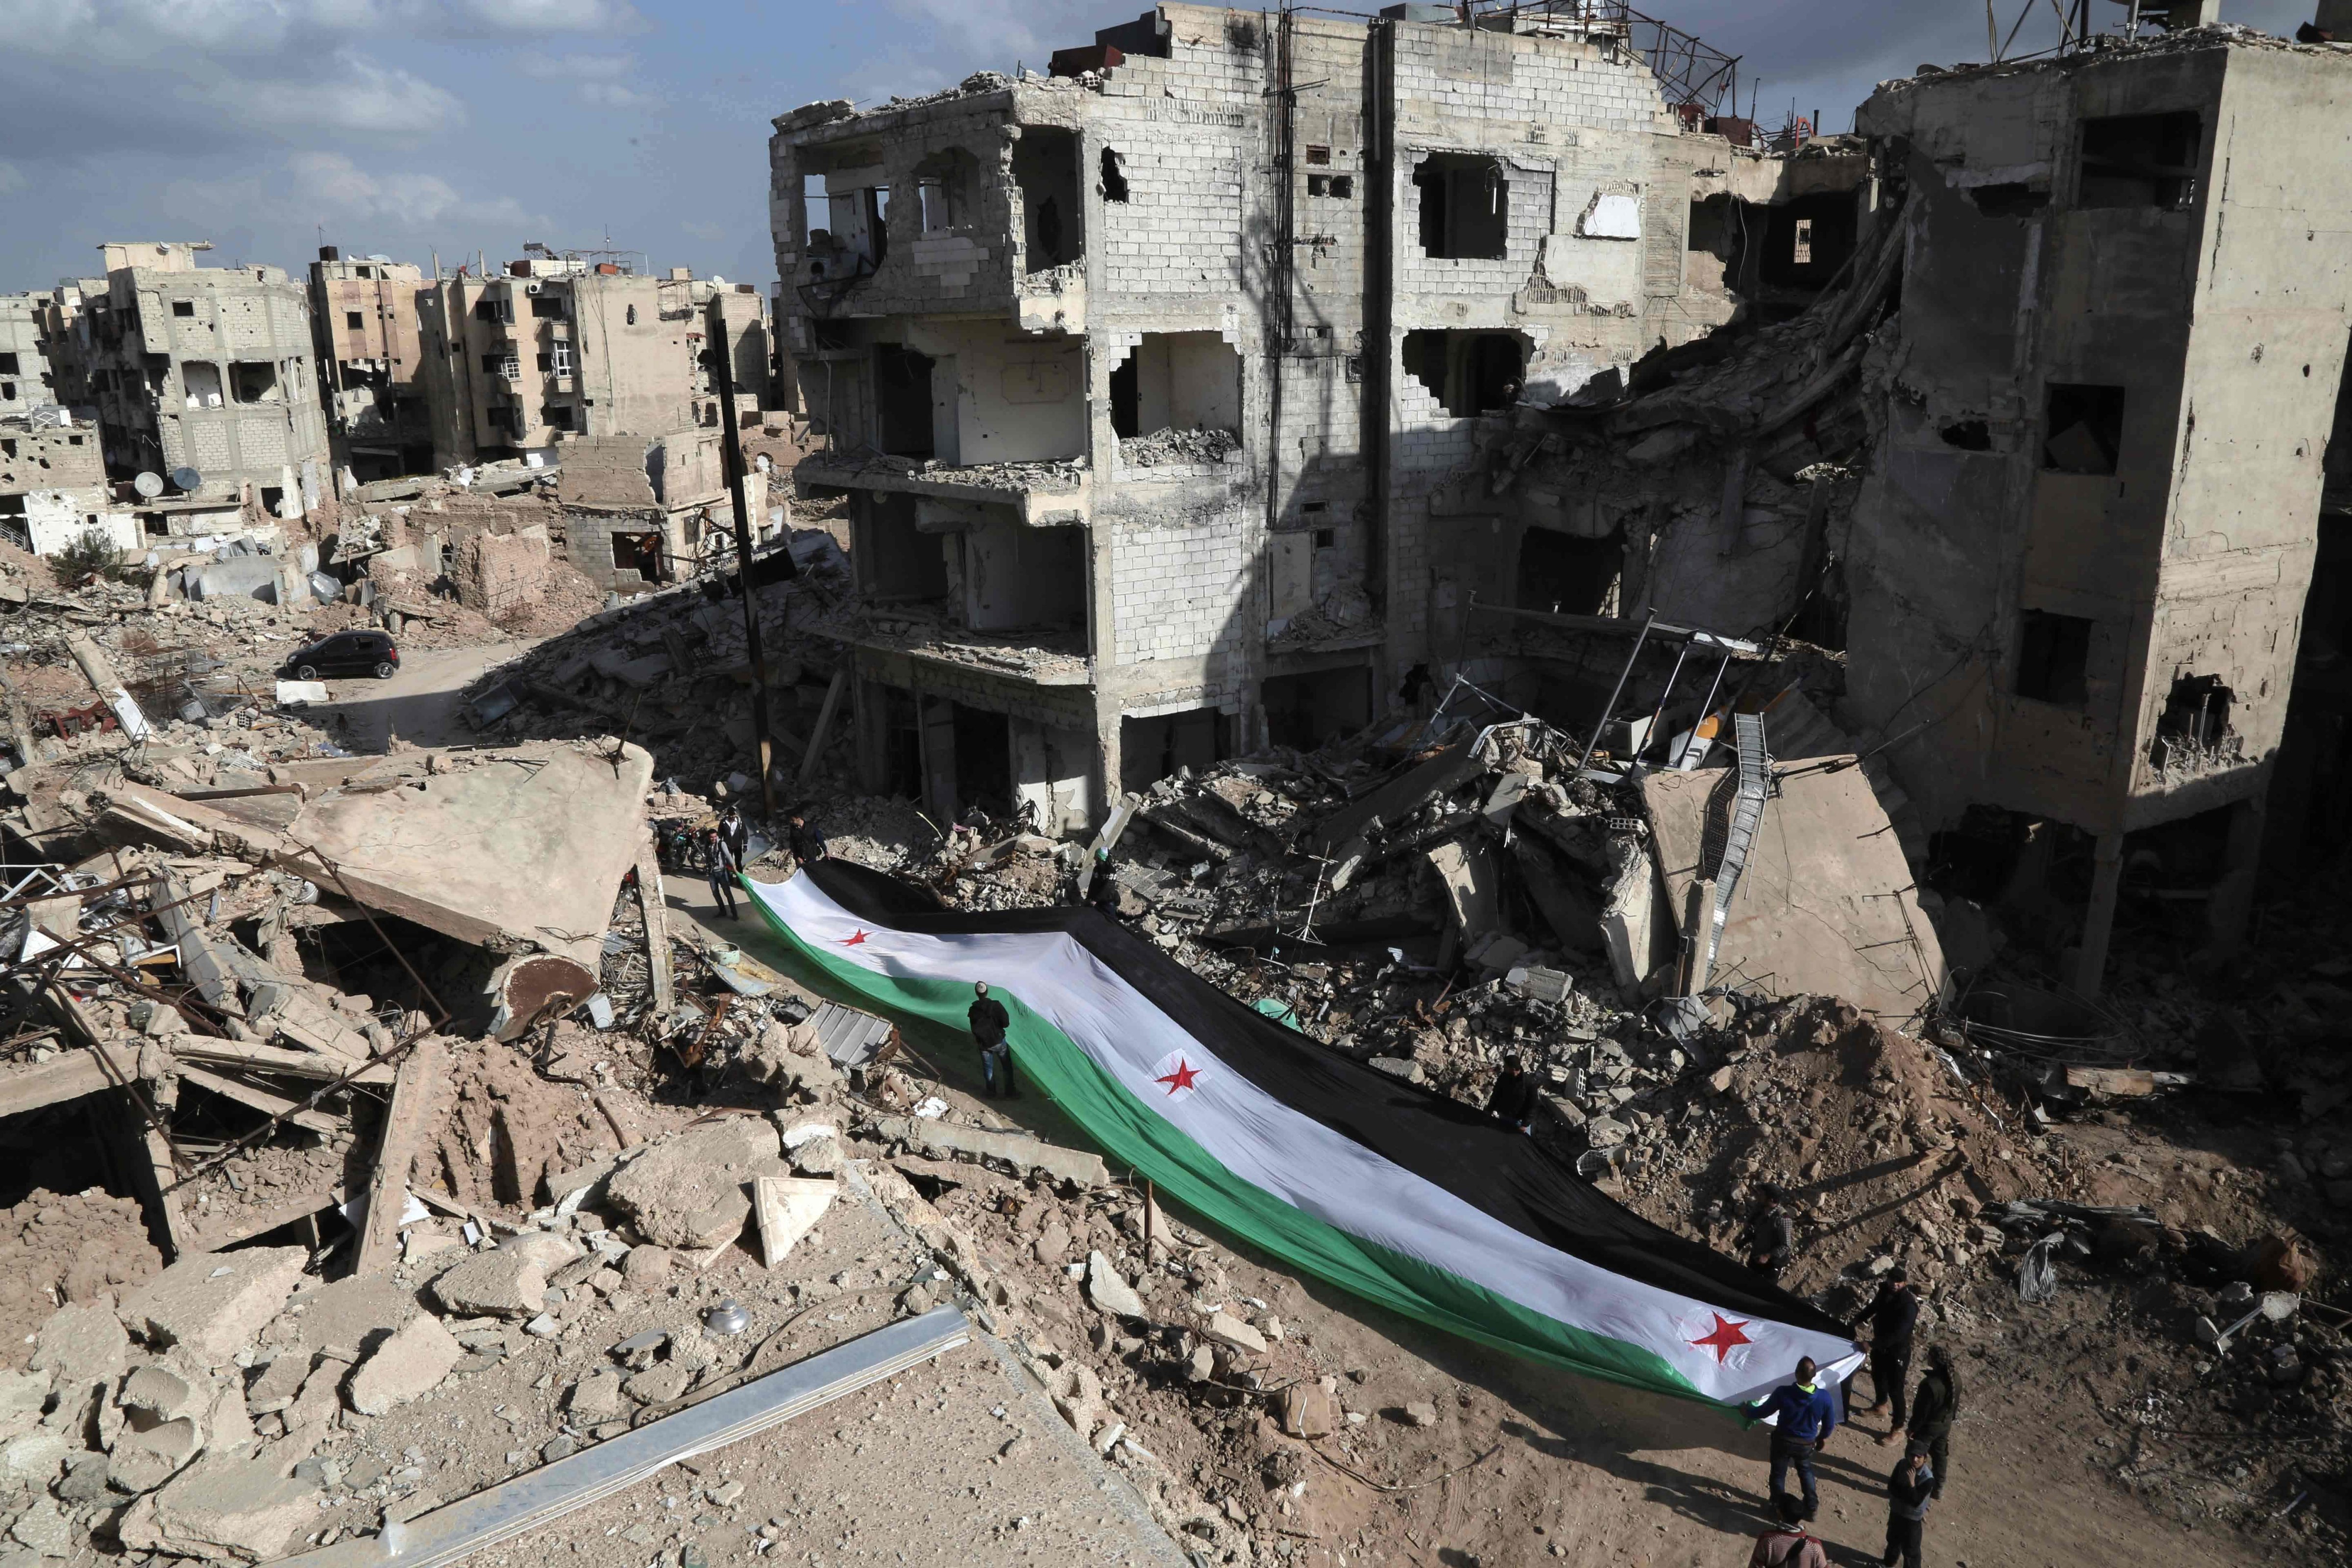 Residents and activists hold a giant pre-Baath Syrian flag, now used by the Syrian opposition, during an anti-regime protest in the rubble of destroyed buildings in the neighbourhood of Jobar, on the eastern outskirts of the capital Damascus, on March 3, 2016. (Amer Almohibany—AFP/Getty Images)